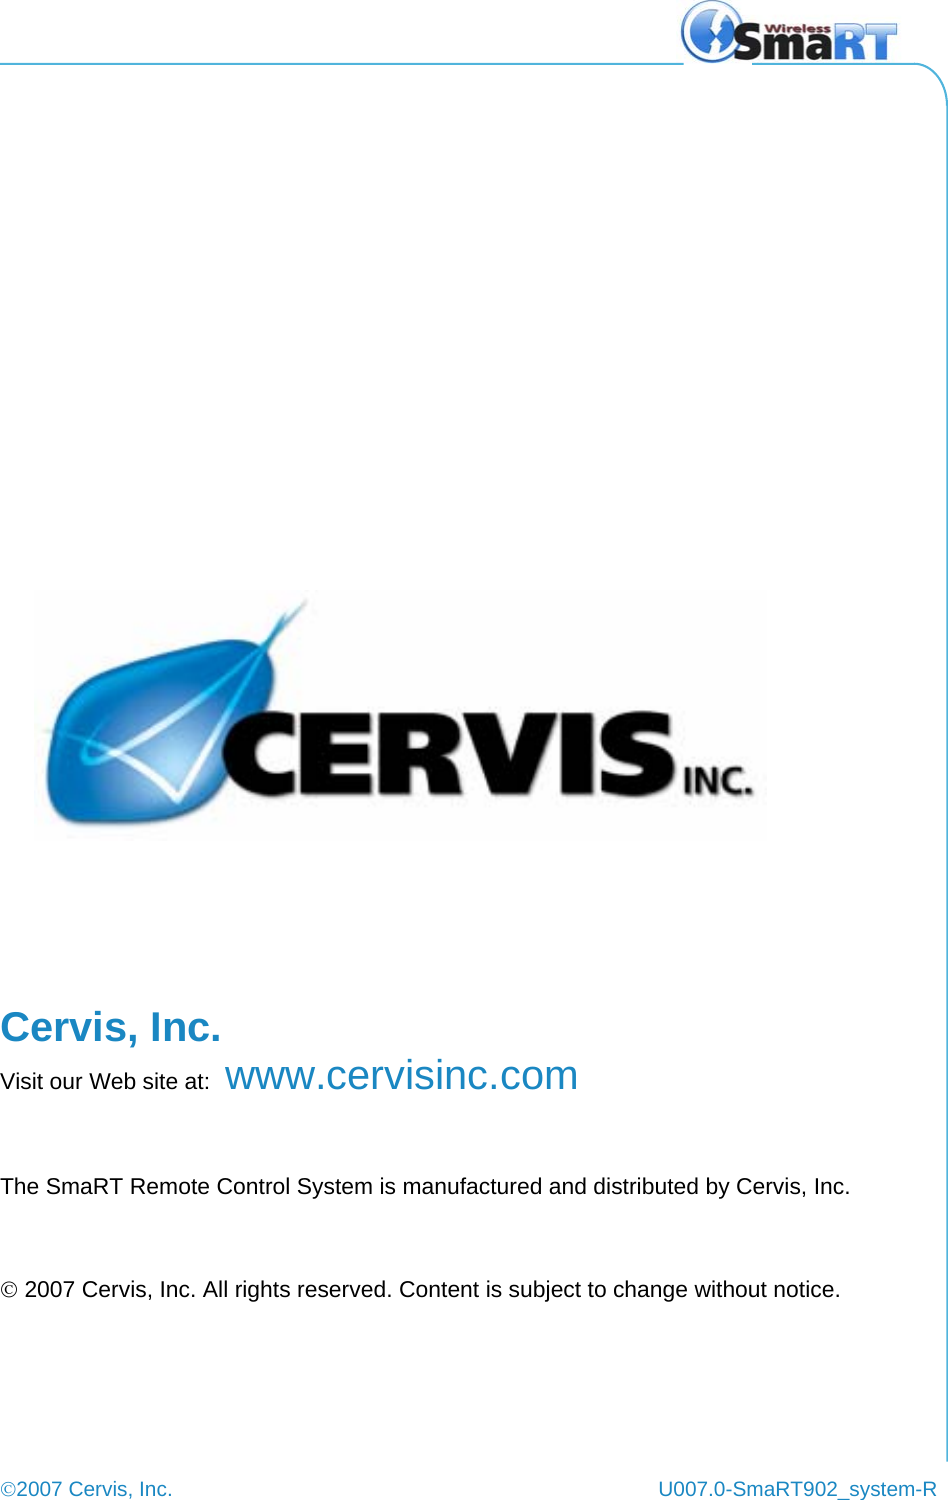  ©2007 Cervis, Inc.    U007.0-SmaRT902_system-R  Cervis, Inc. Visit our Web site at: www.cervisinc.com The SmaRT Remote Control System is manufactured and distributed by Cervis, Inc. © 2007 Cervis, Inc. All rights reserved. Content is subject to change without notice.  